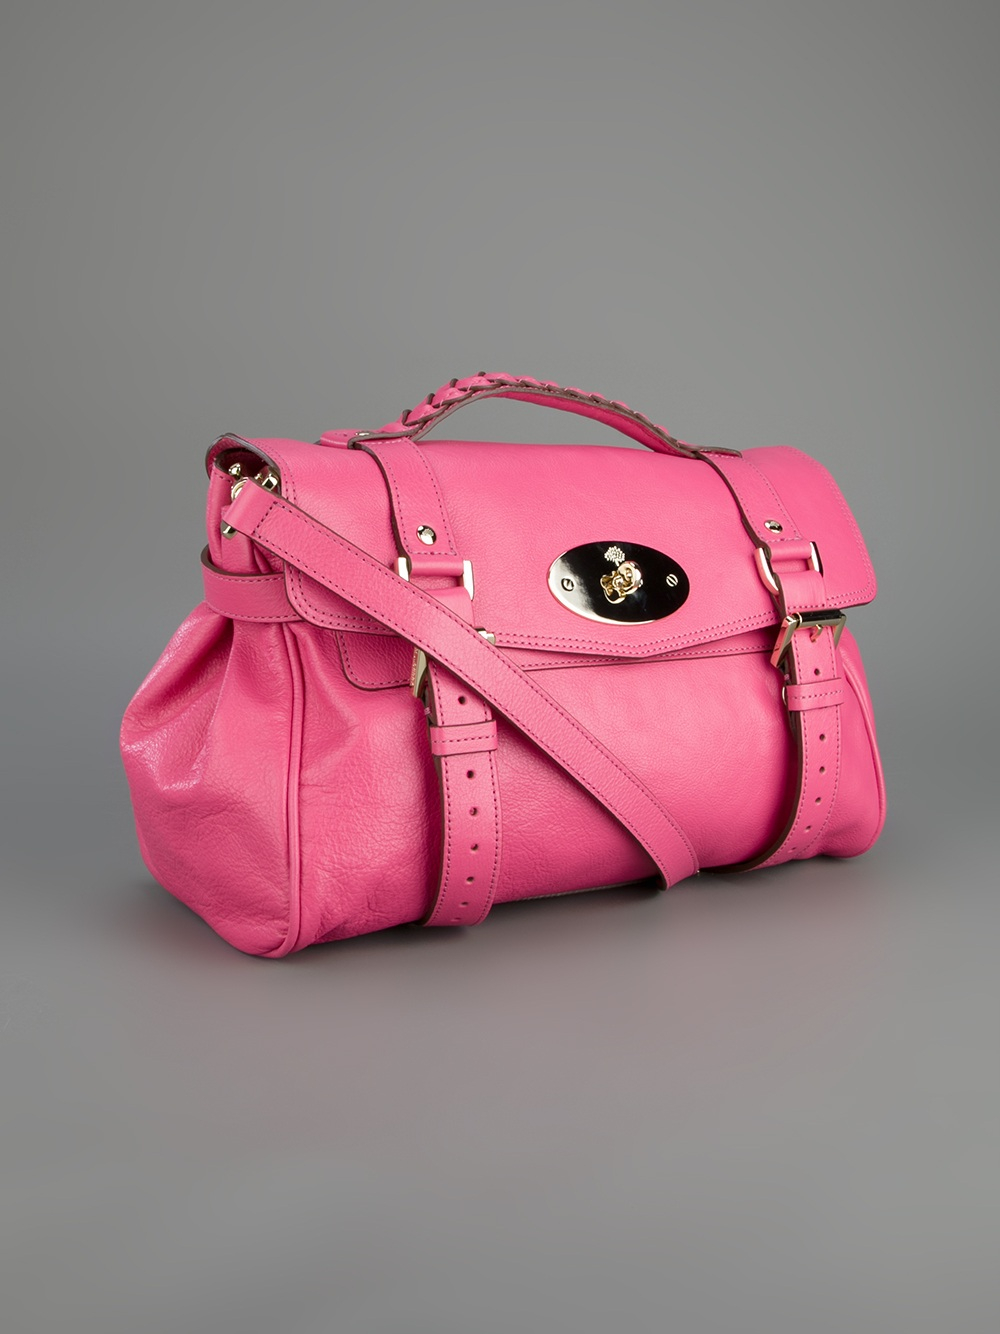 Mulberry Alexa Bag in Pink & Purple (Pink) - Lyst